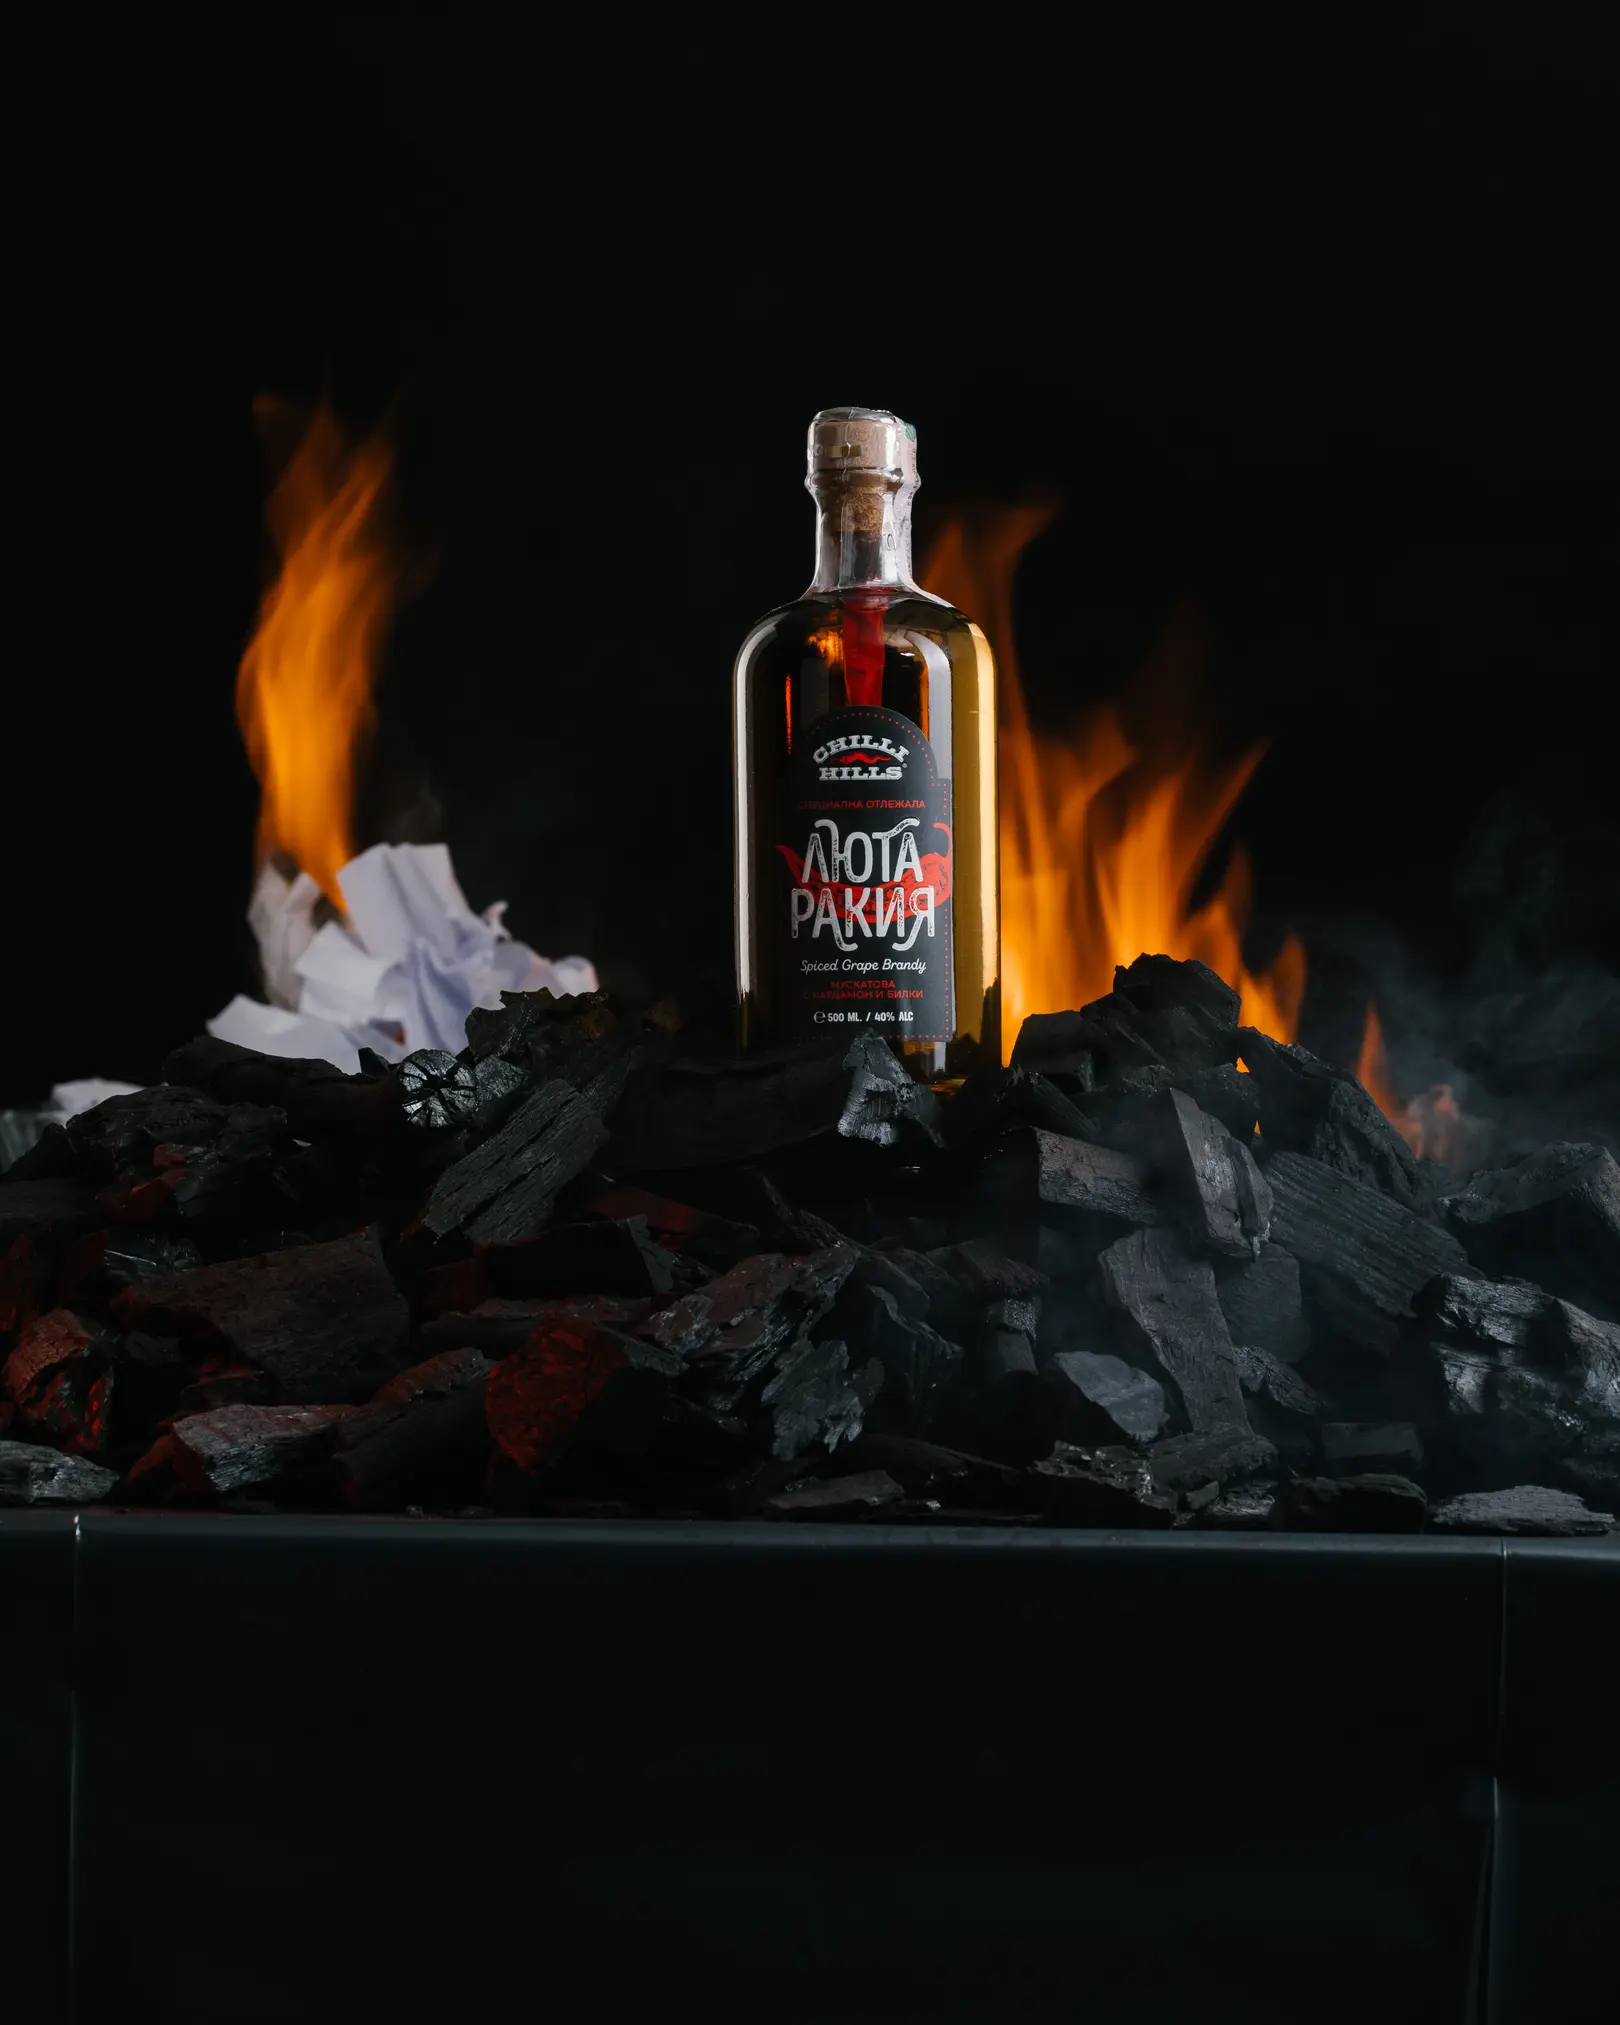 Result 2. The photo shows the result of shooting a bottle according to the light scheme shown in the second schema. The viewer sees the label of the bottle and the fire behind the bottle.